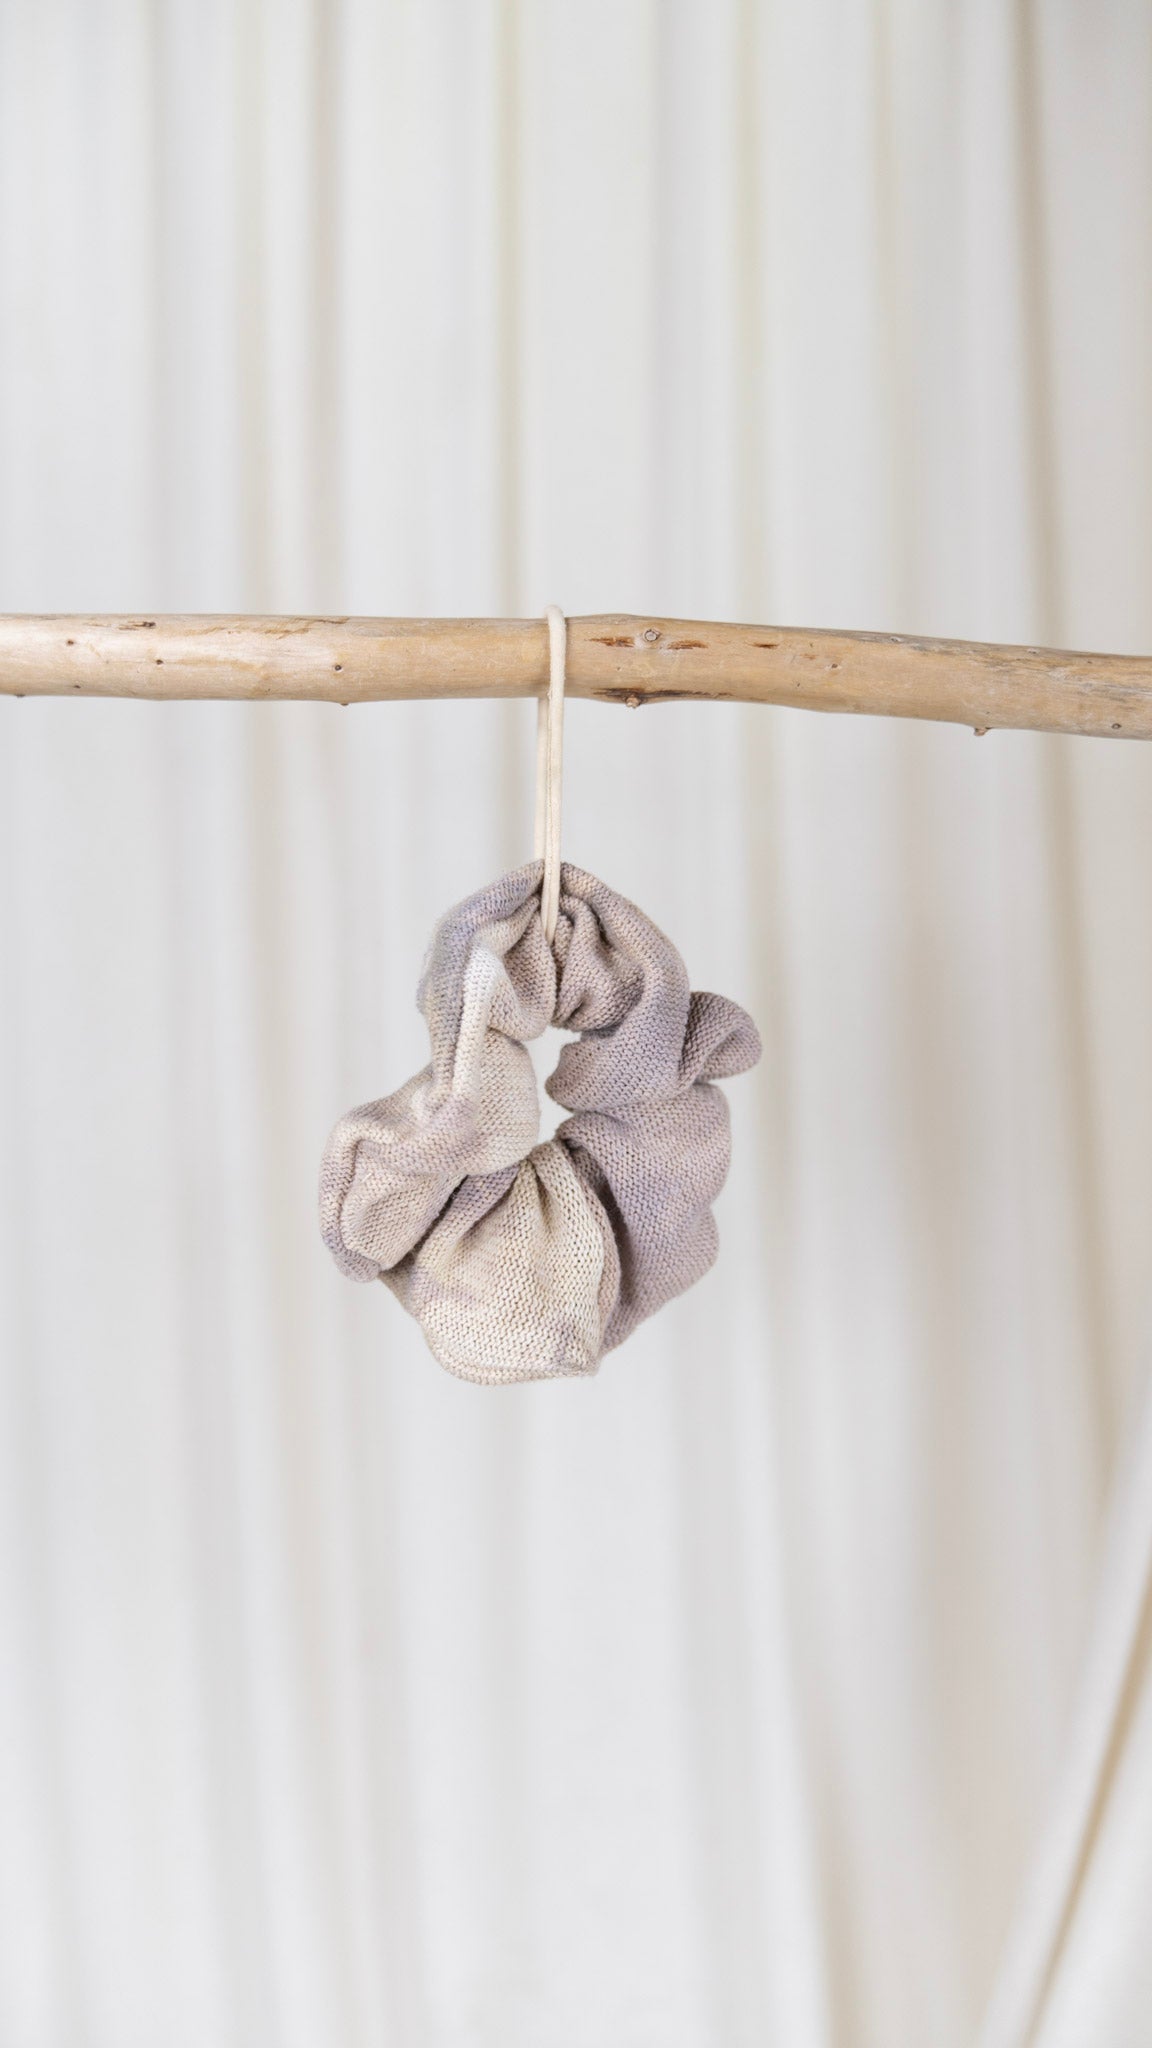 One light purple and cream dyed oversized sweater knit scrunchie hanging from a piece of driftwood